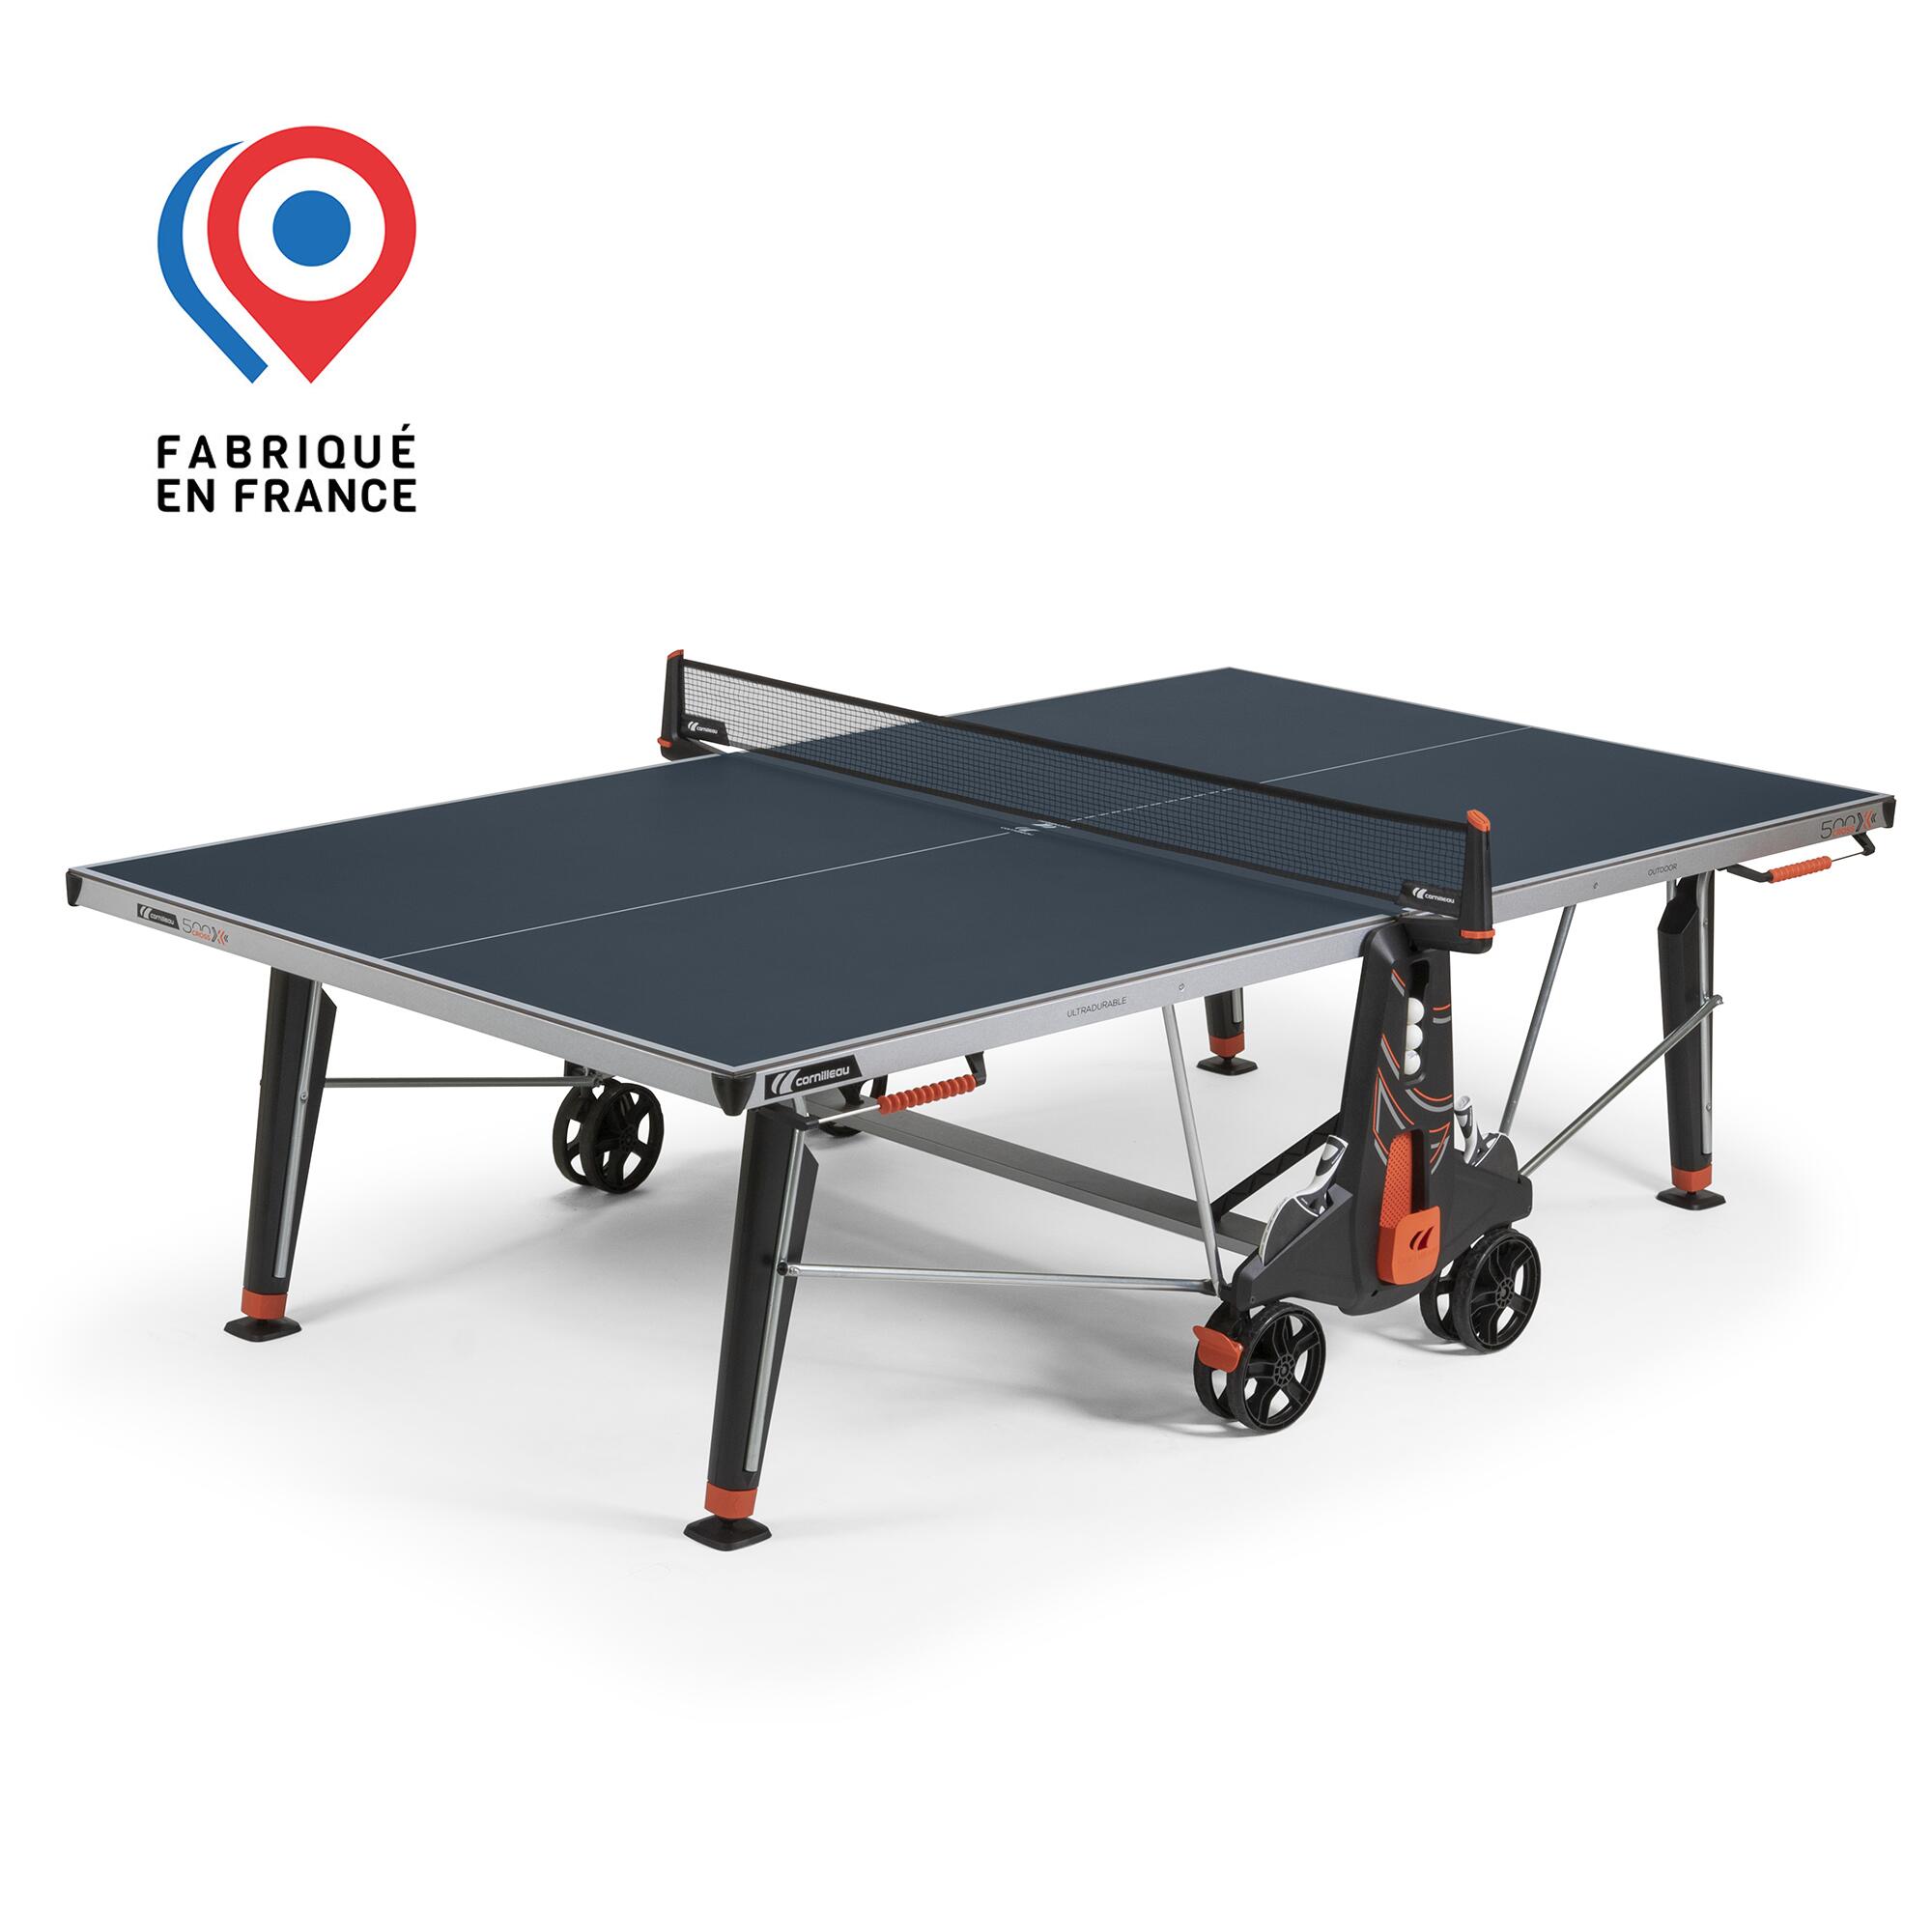 CORNILLEAU 500X Performance Outdoor Table Tennis Table - Blue